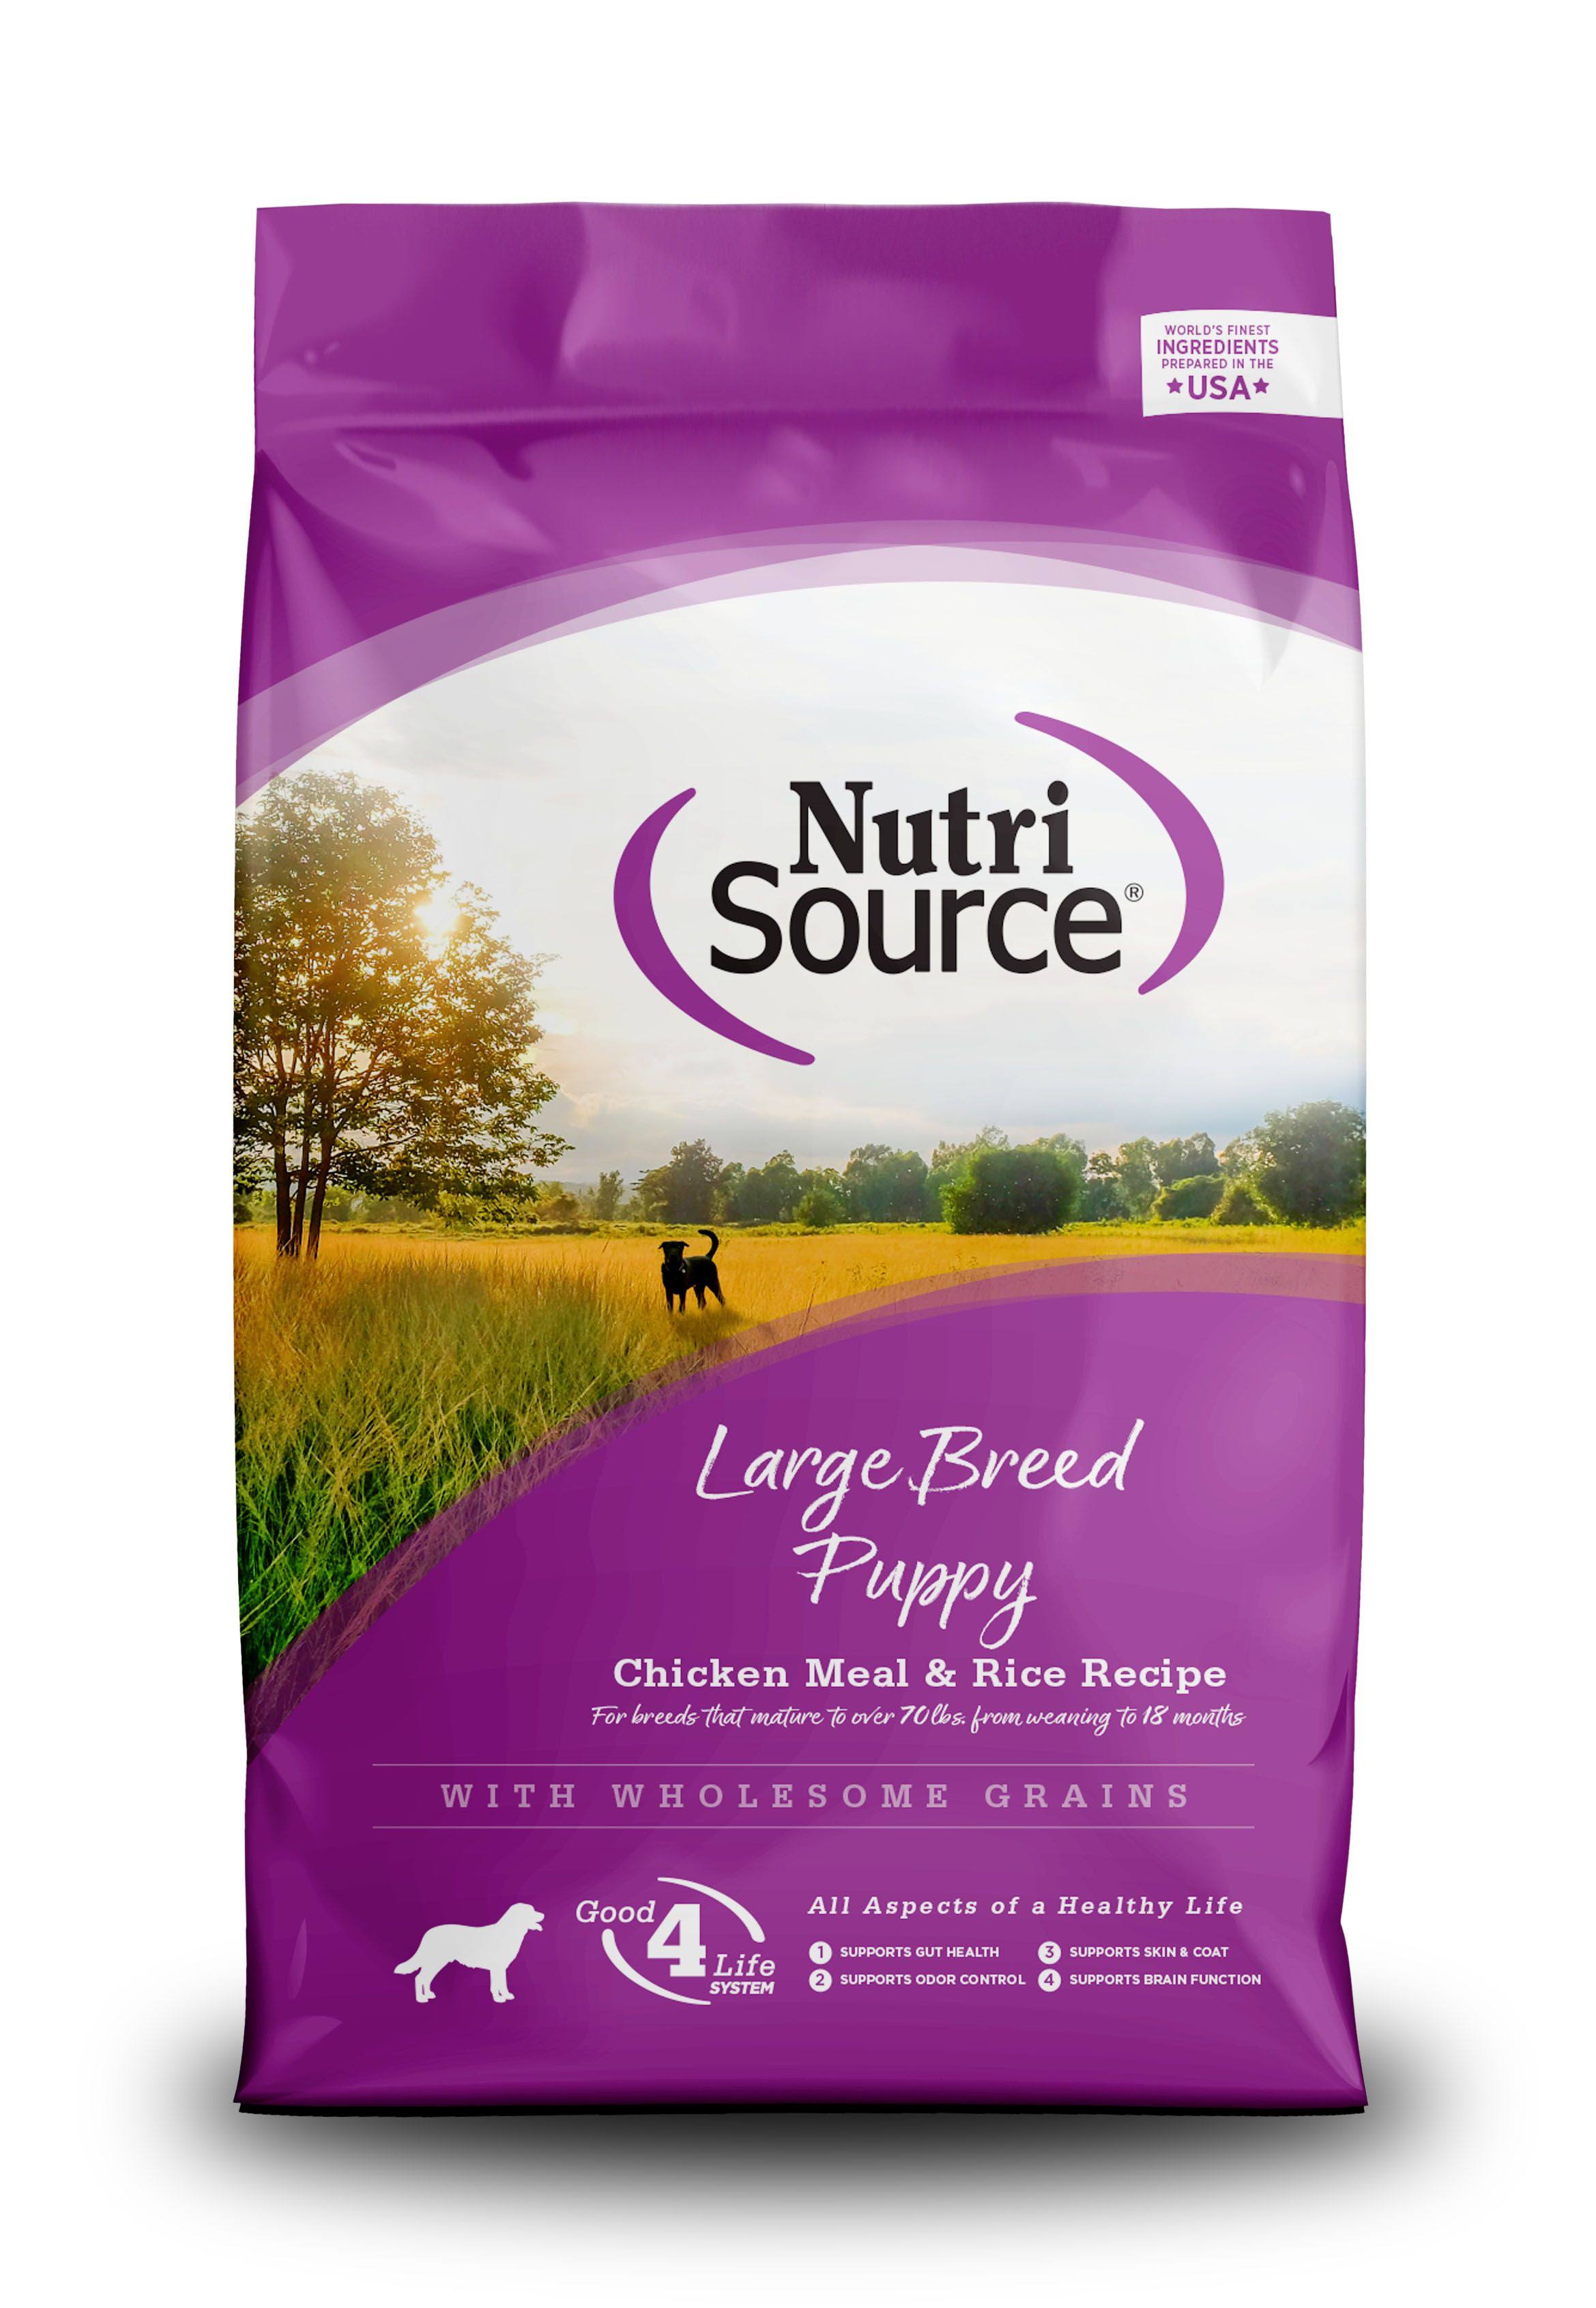 Nutrisource Chicken & Rice LG Breed Puppy Dry Dog Food